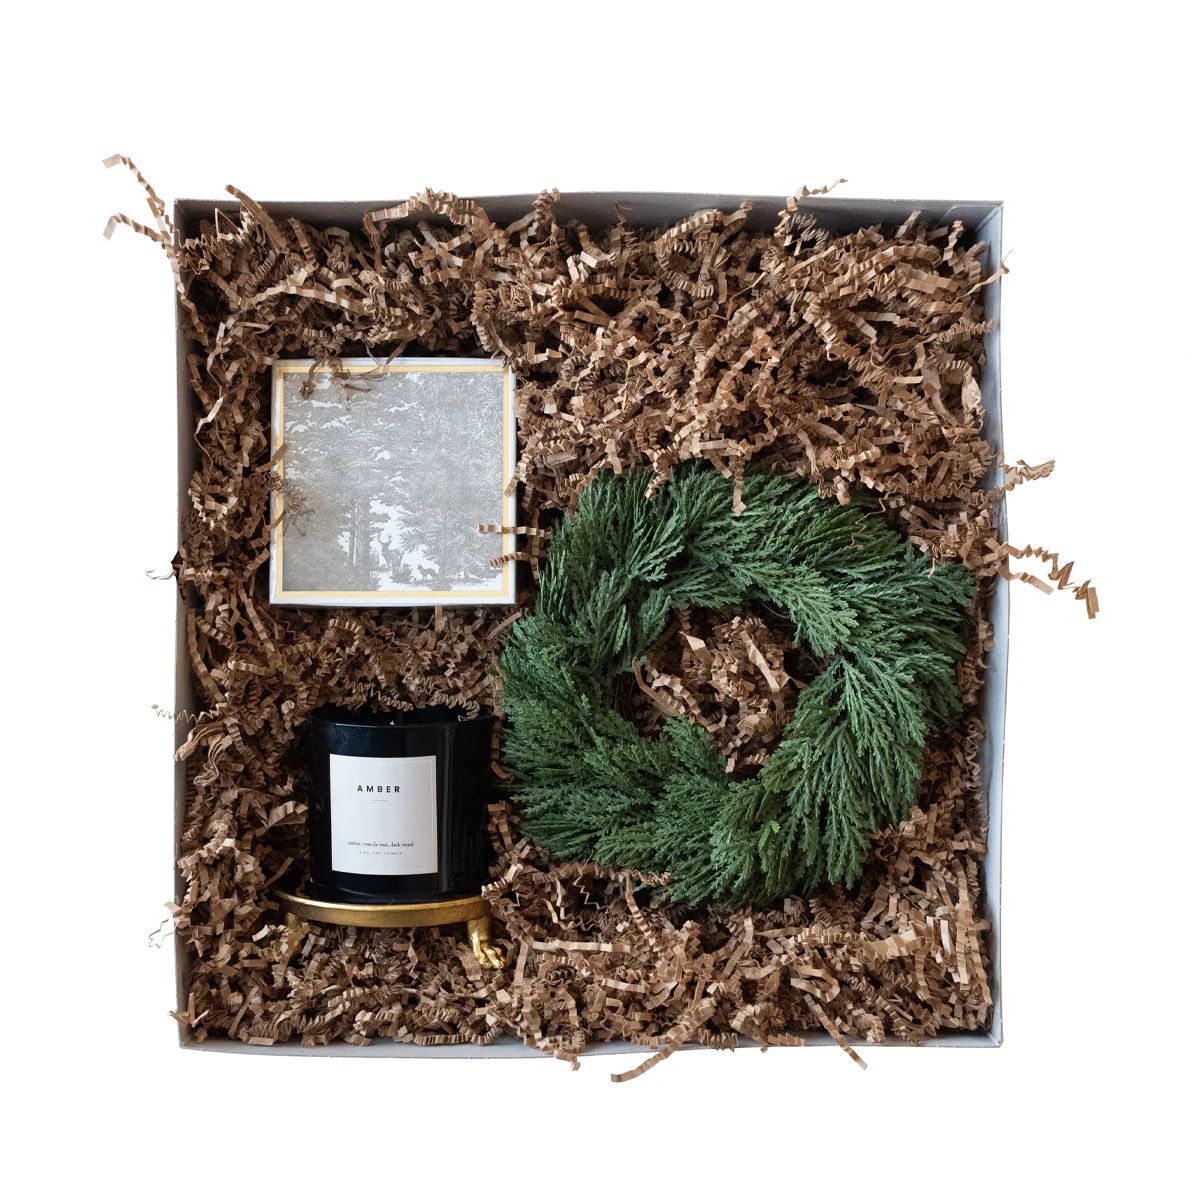 Winter Candle Gift Box | Tuesday Made